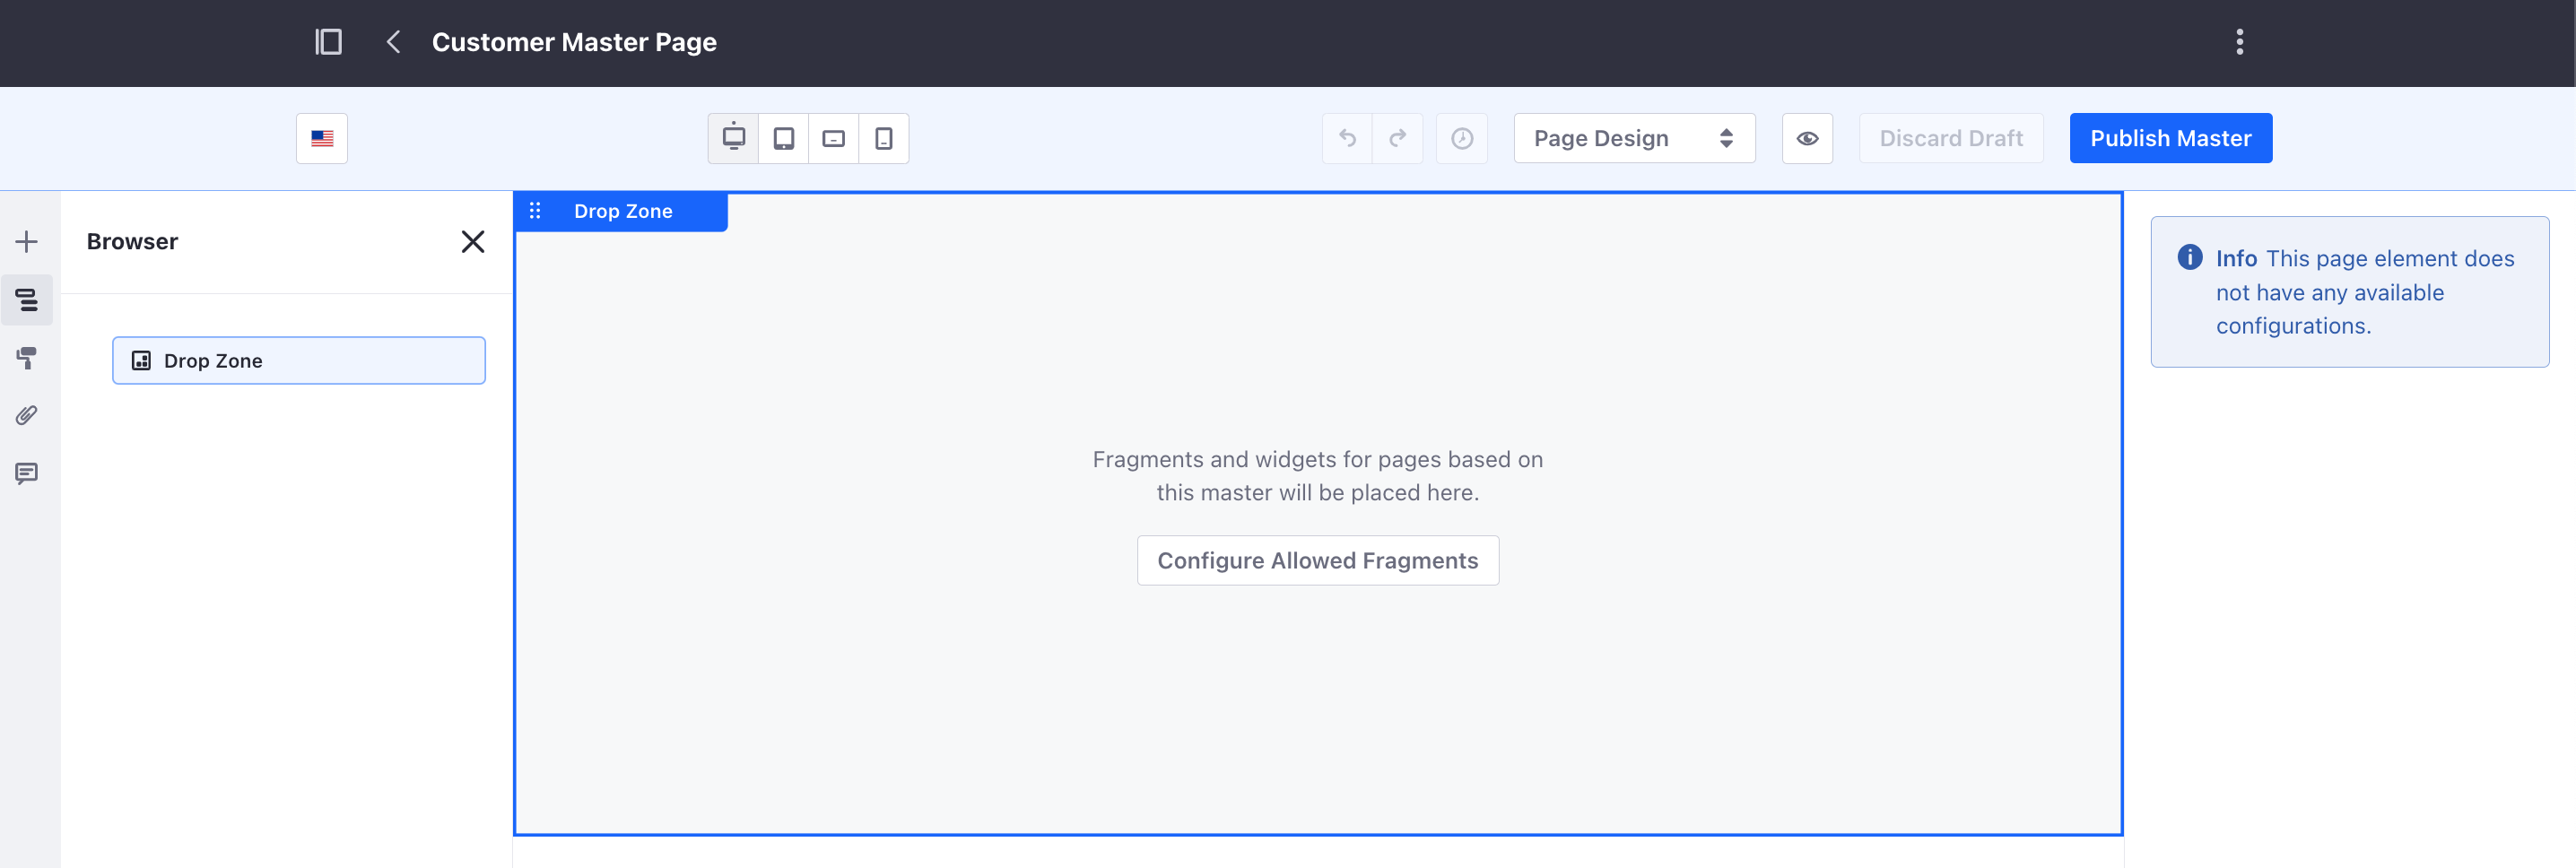 A typical use case for a Master Page Template has a Header, a Drop Zone, and a Footer